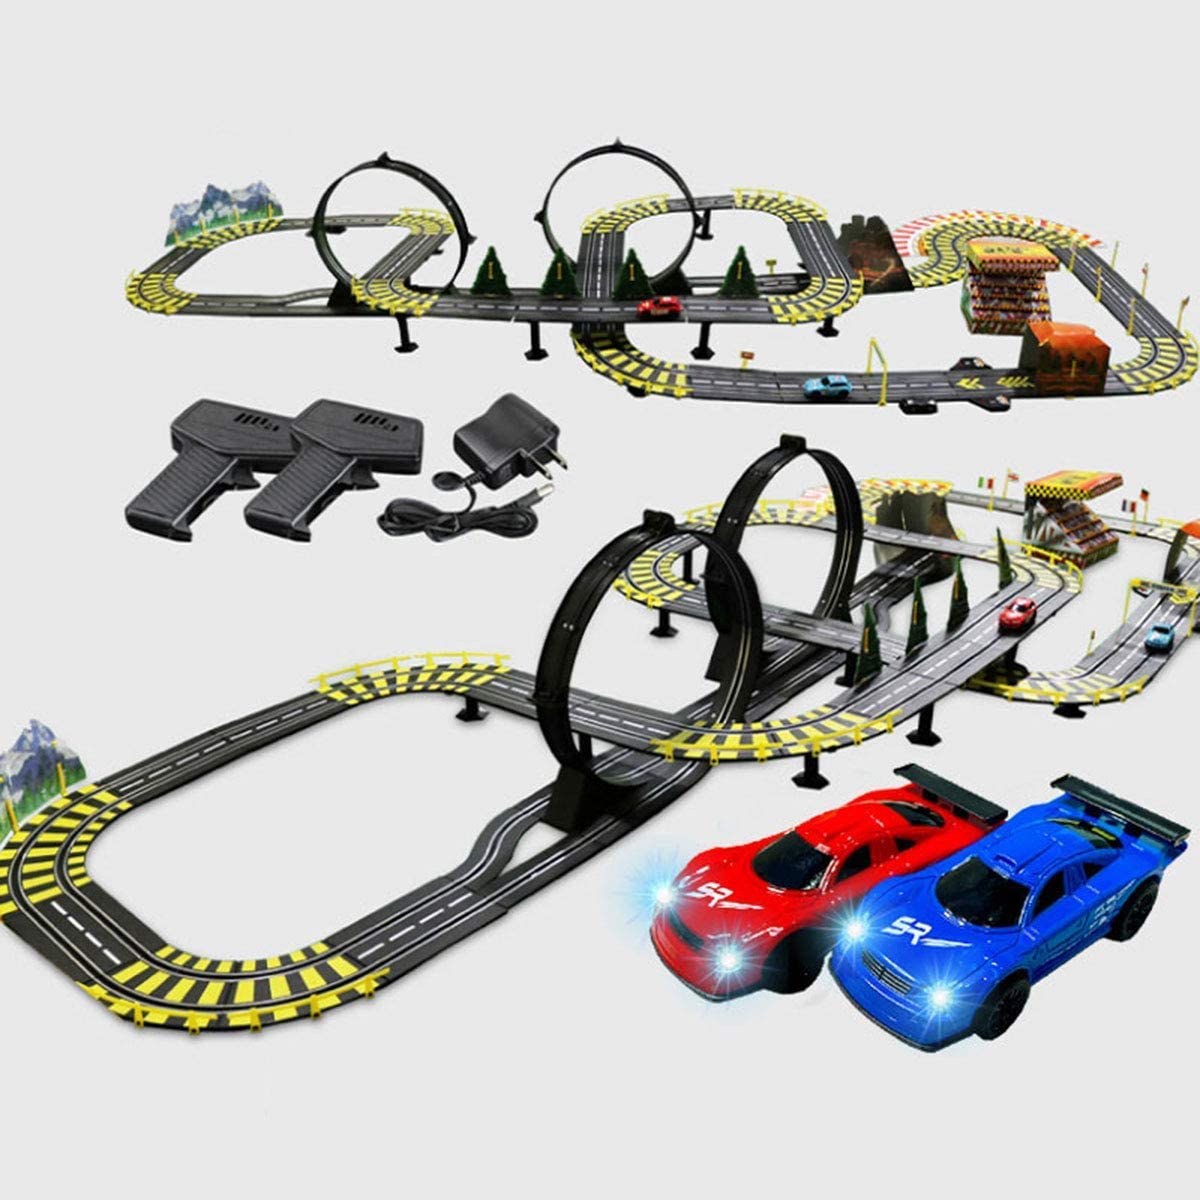 11.6 m Electric Track Racing Slot Sets Two Cars Controls Kids Vehicle Toys Gift